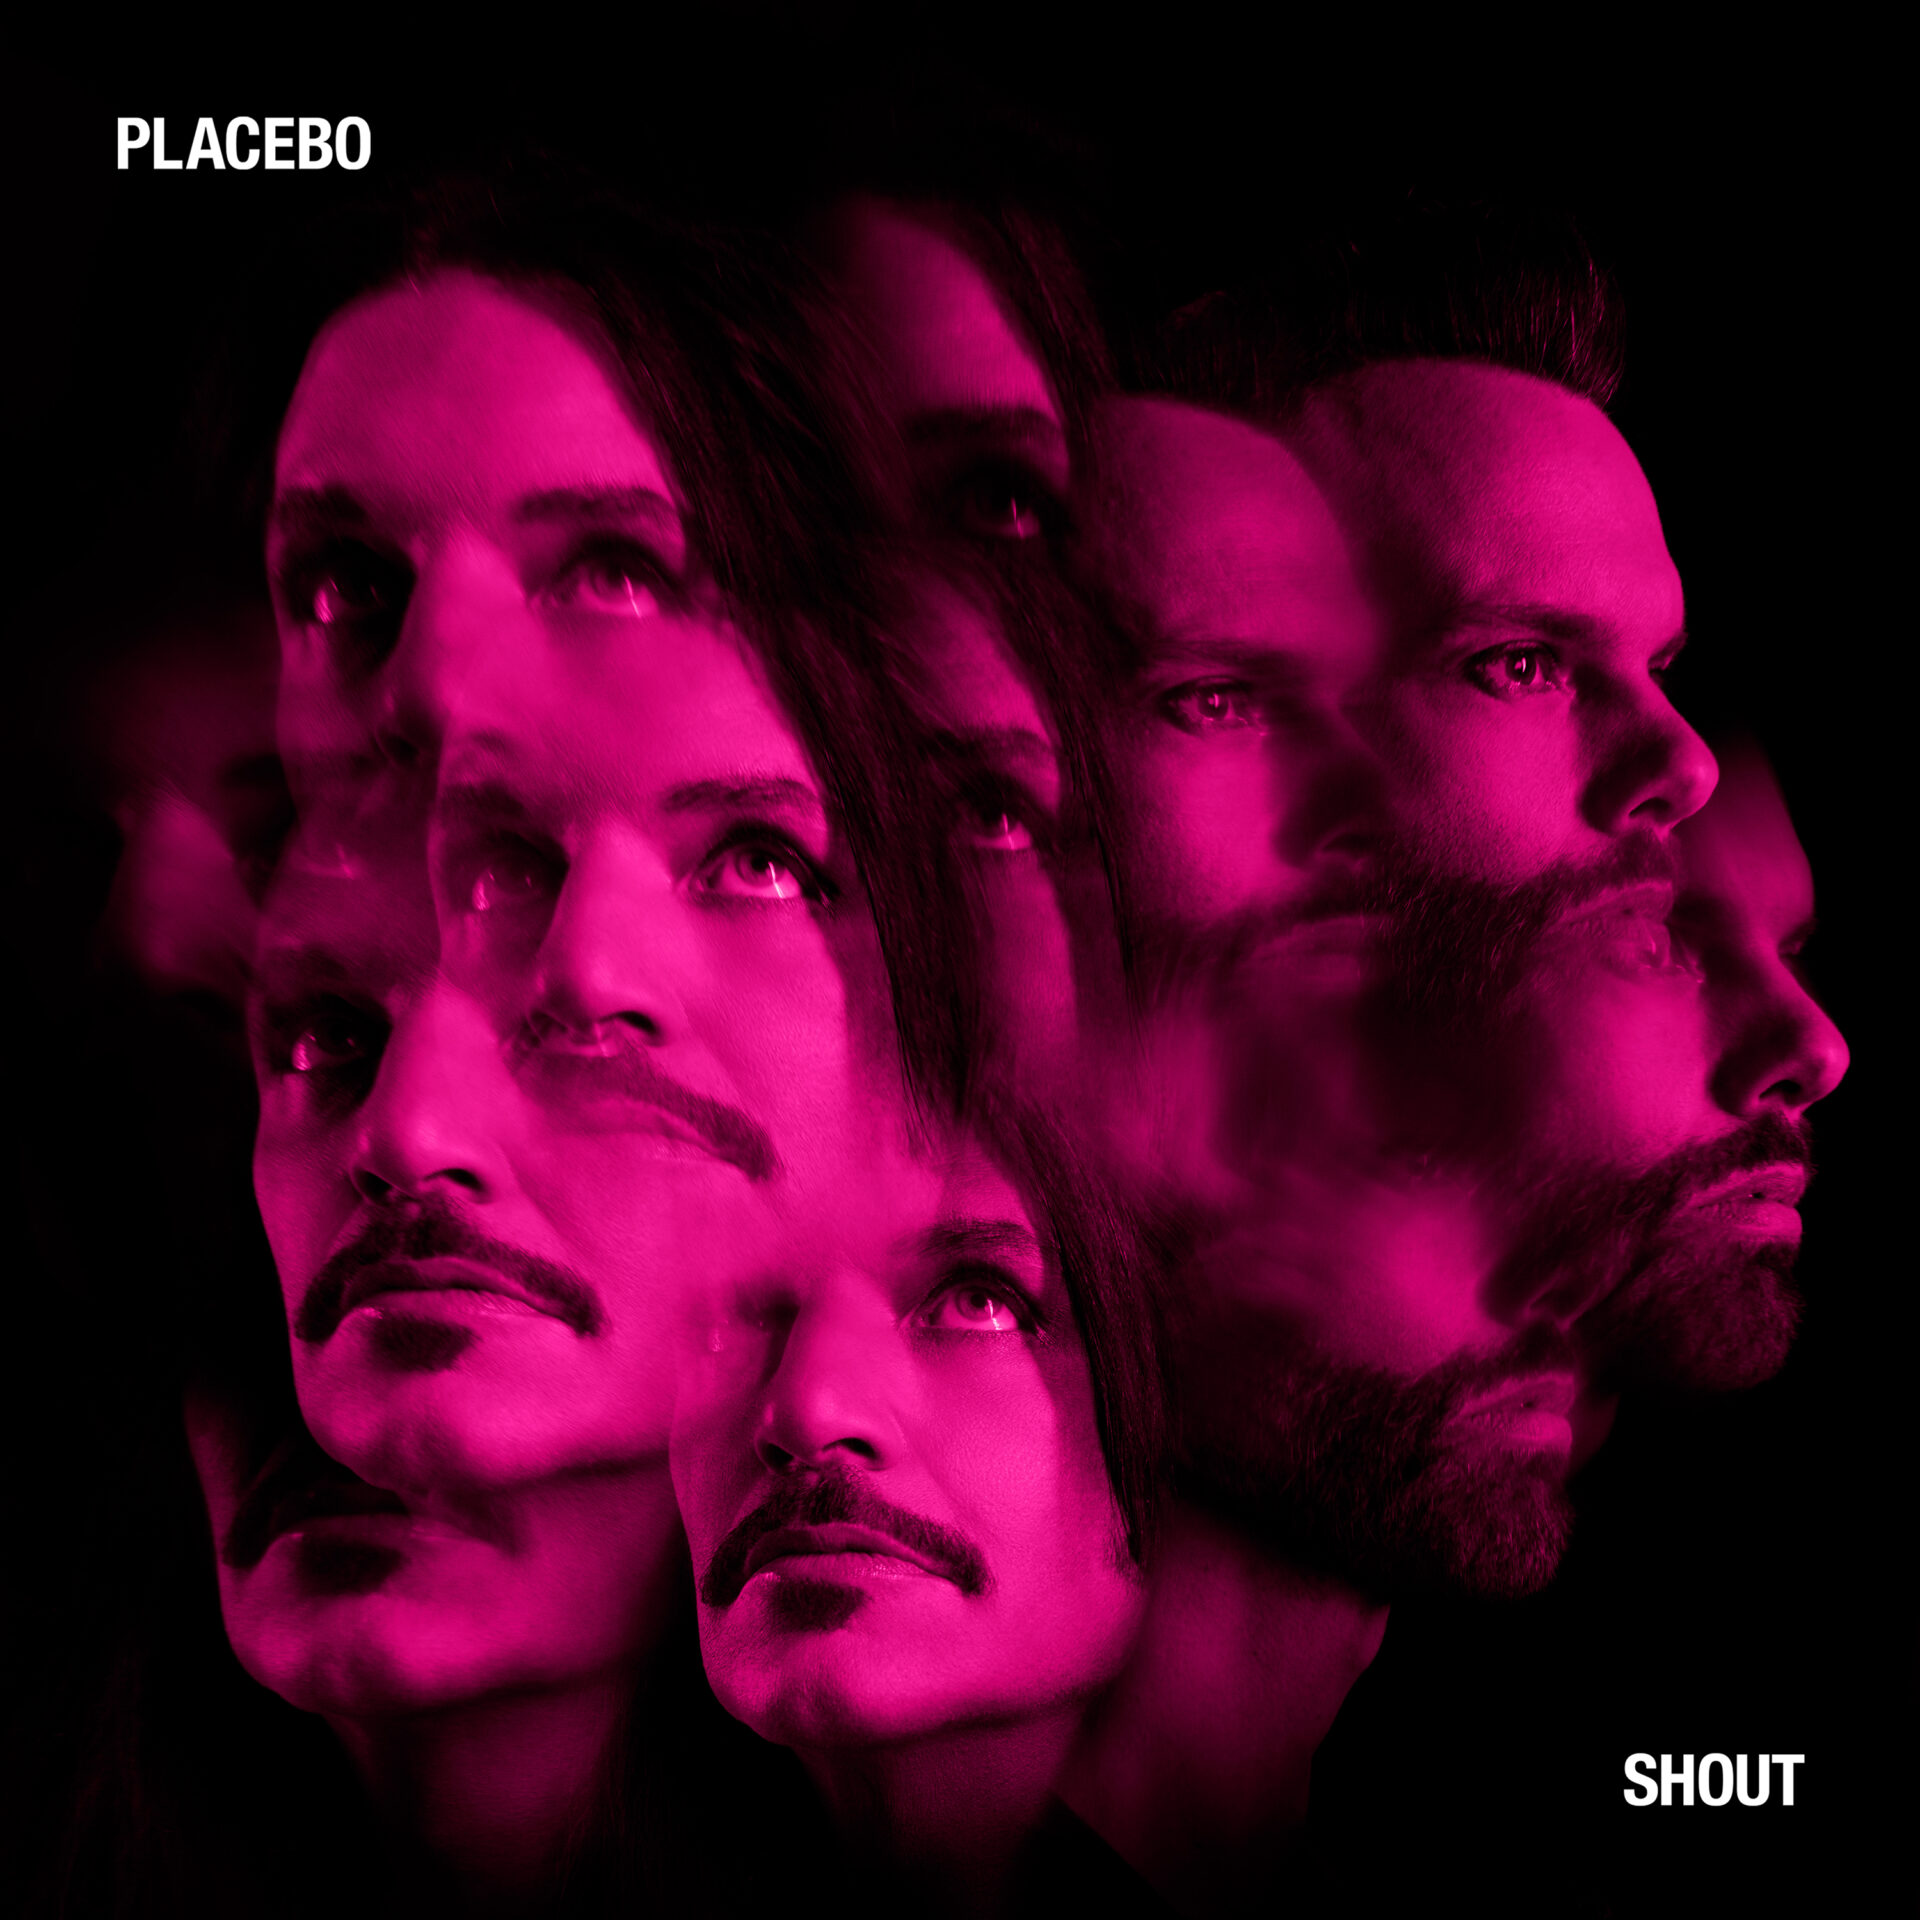 NEWS: Placebo cover classic Tears for Fears single 'Shout'-"A rallying cry against apathy"